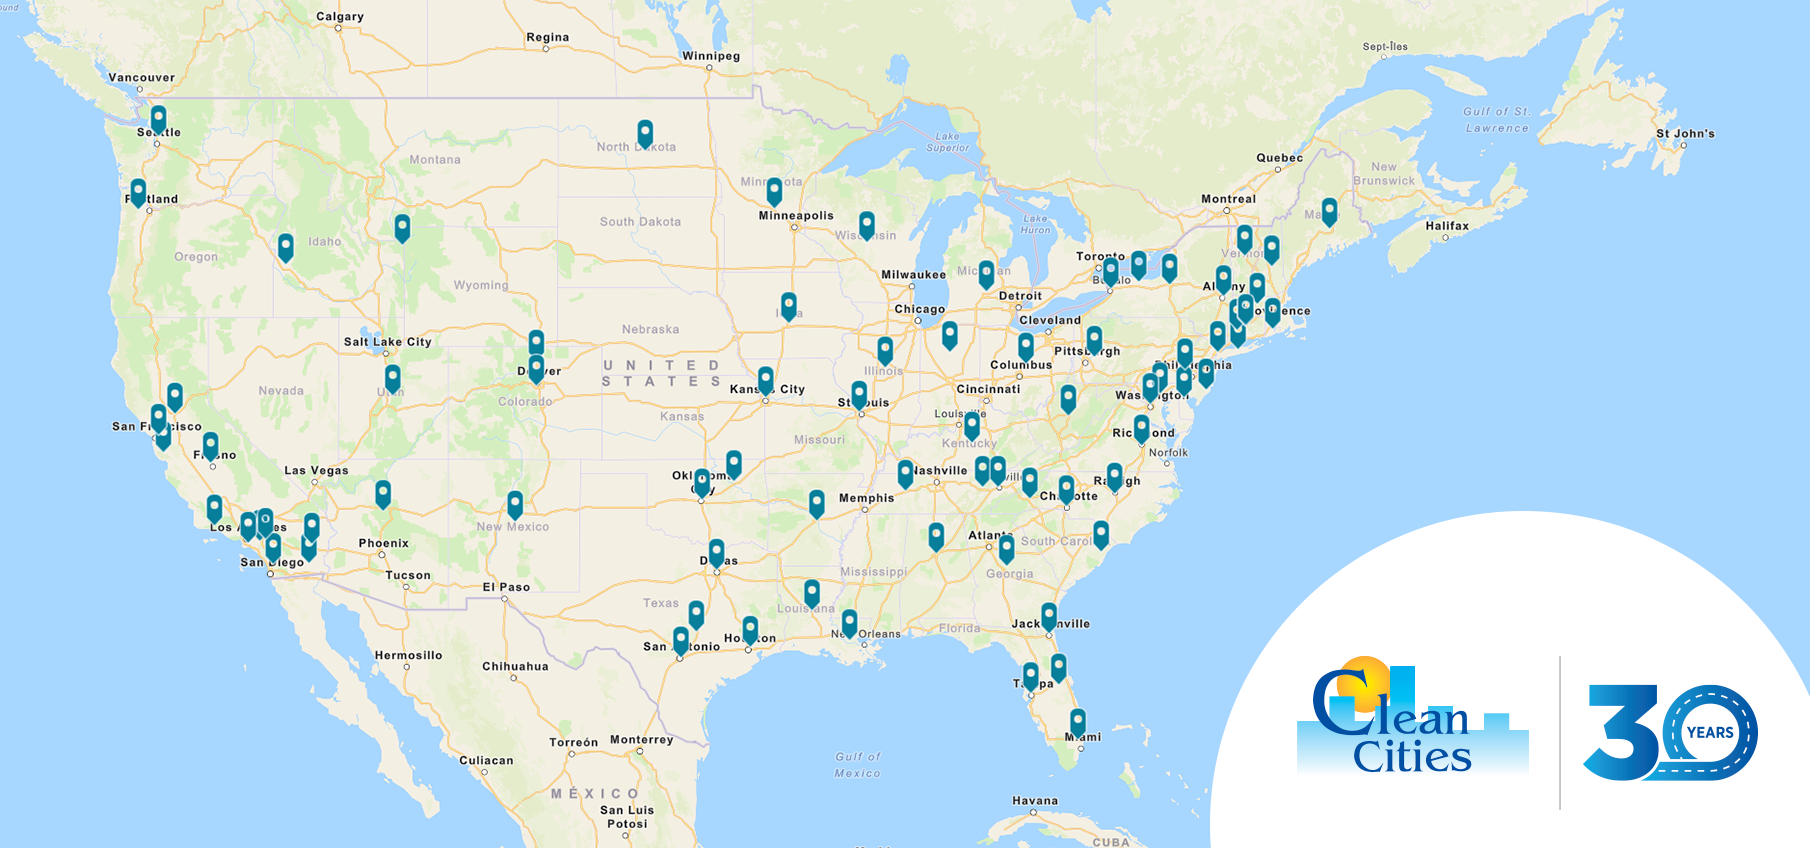 map of Clean Cities projects in local communities celebrating 30 years